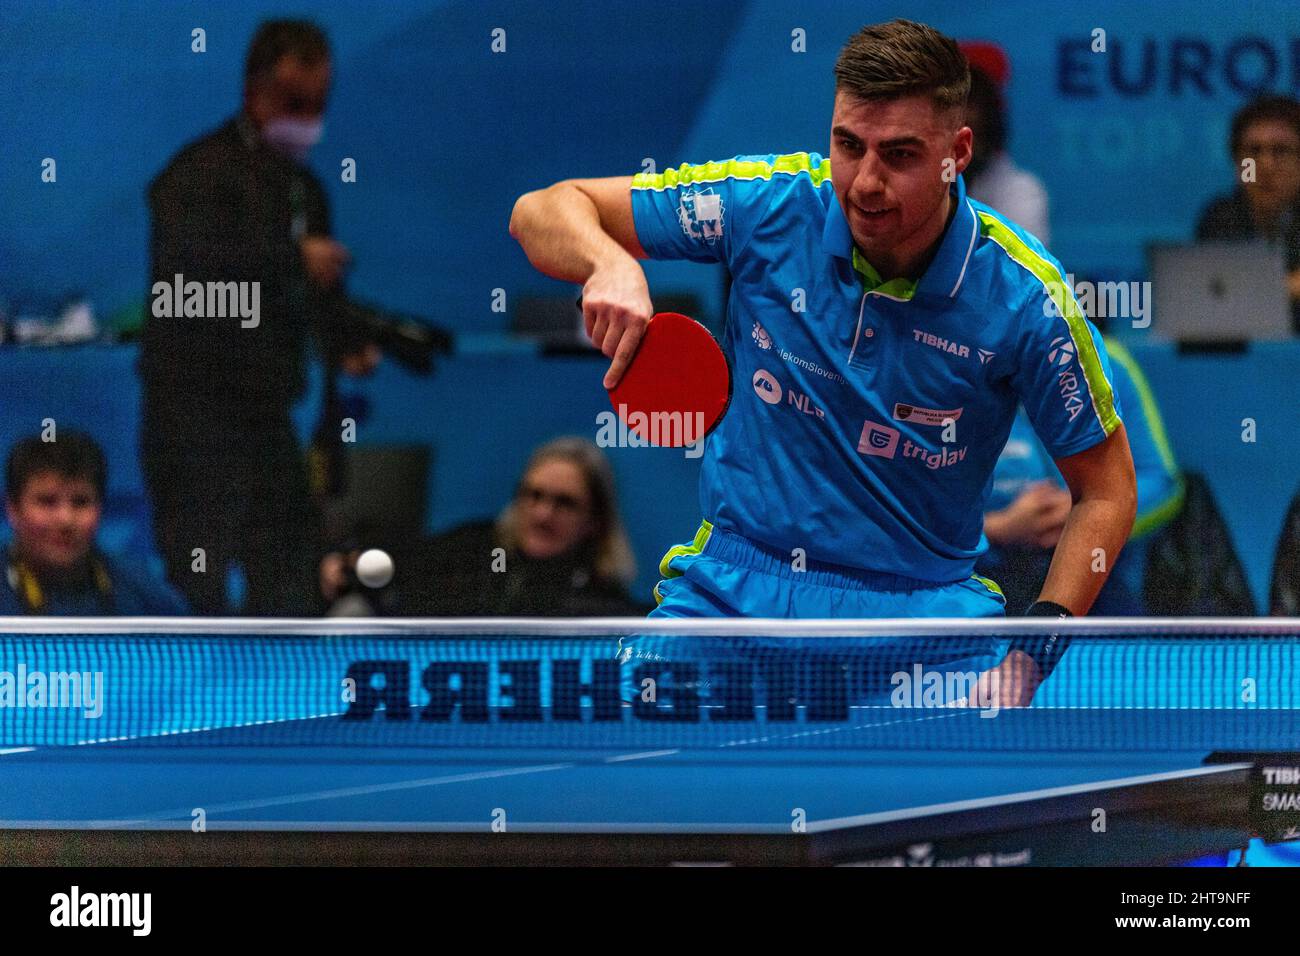 Montreux, Switzerland. 02nd Aug, 2022. Darko Jorgic of Slovenia is in  action during the final of the men's table tennis tournament at the CCB  Europe Top 16 Montreux 2022 (Photo by Eric